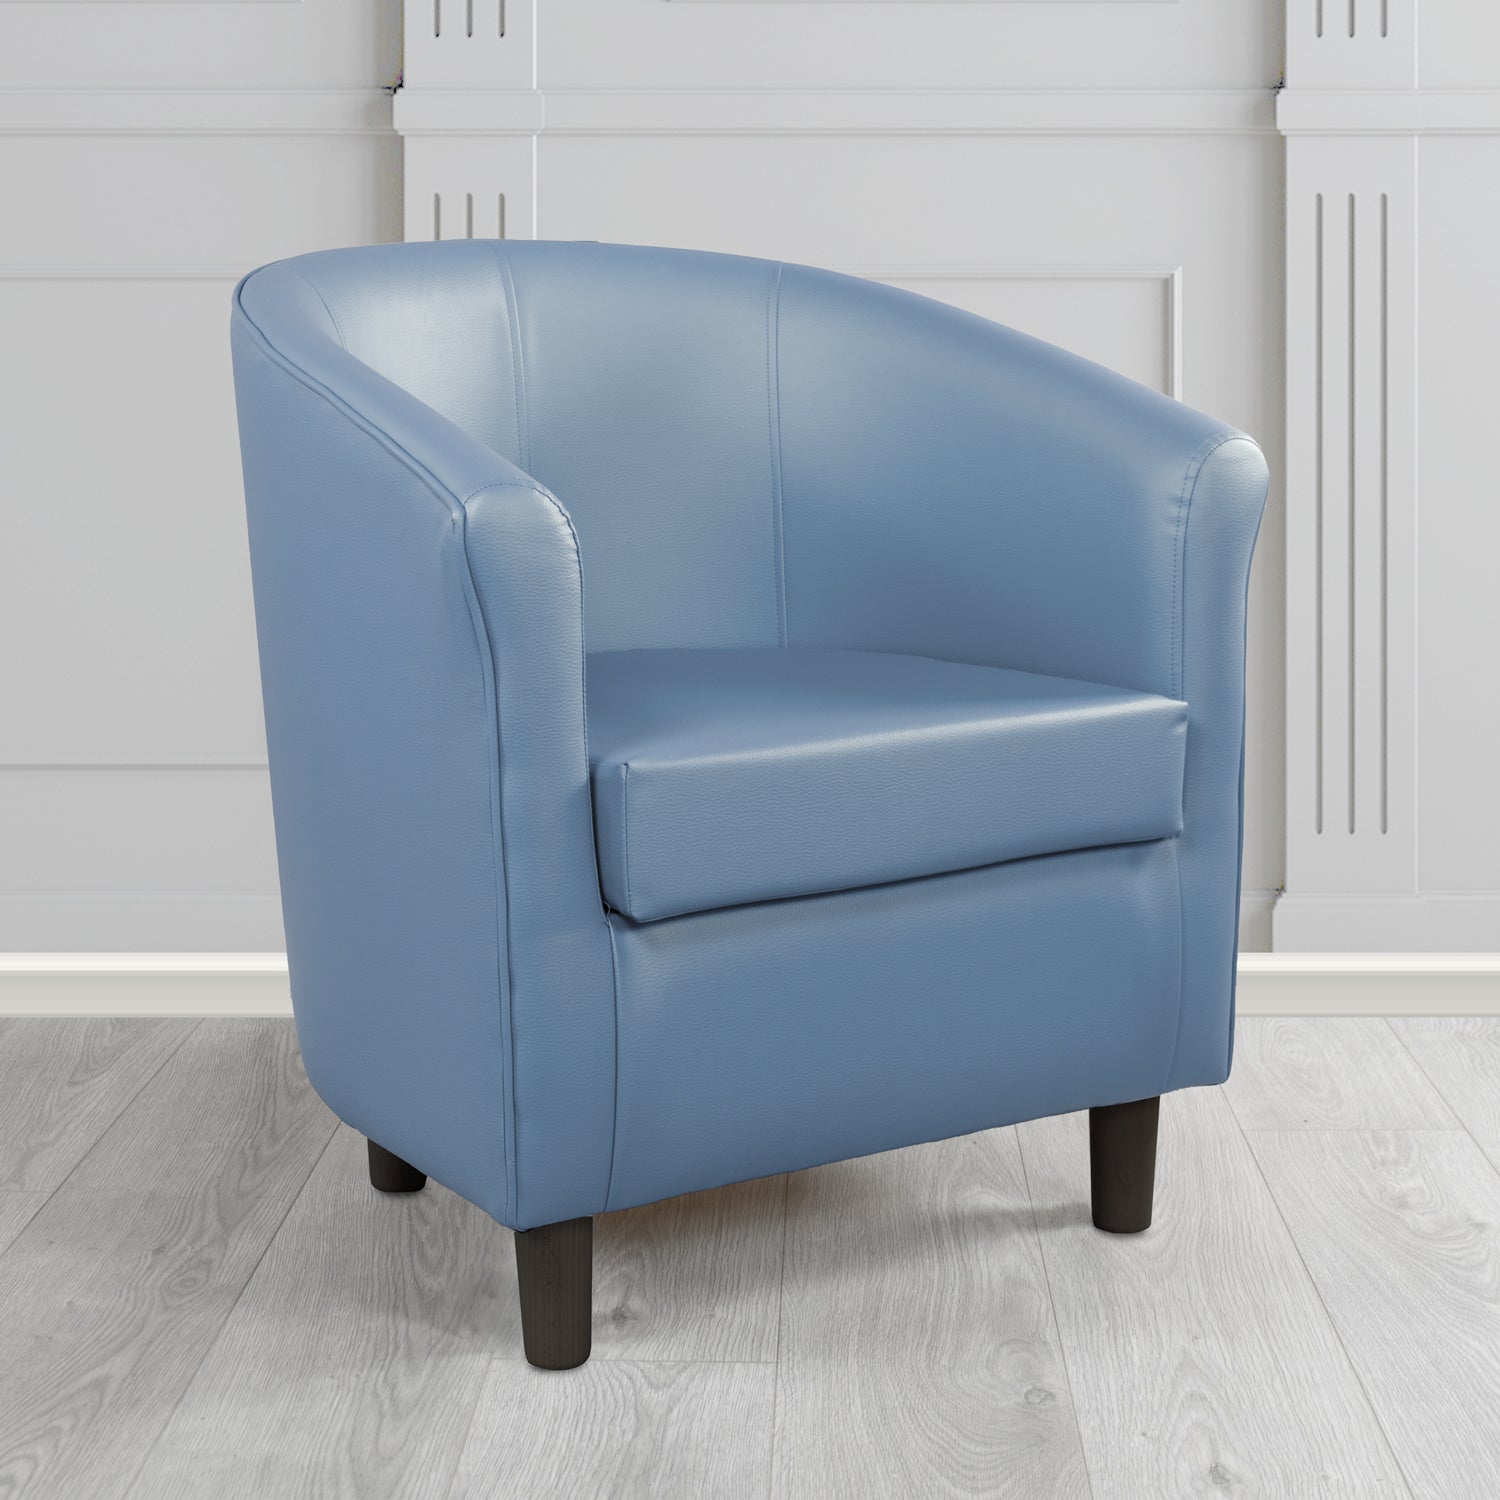 Tuscany Just Colour Dolphin Antimicrobial Crib 5 Contract Faux Leather Tub Chair